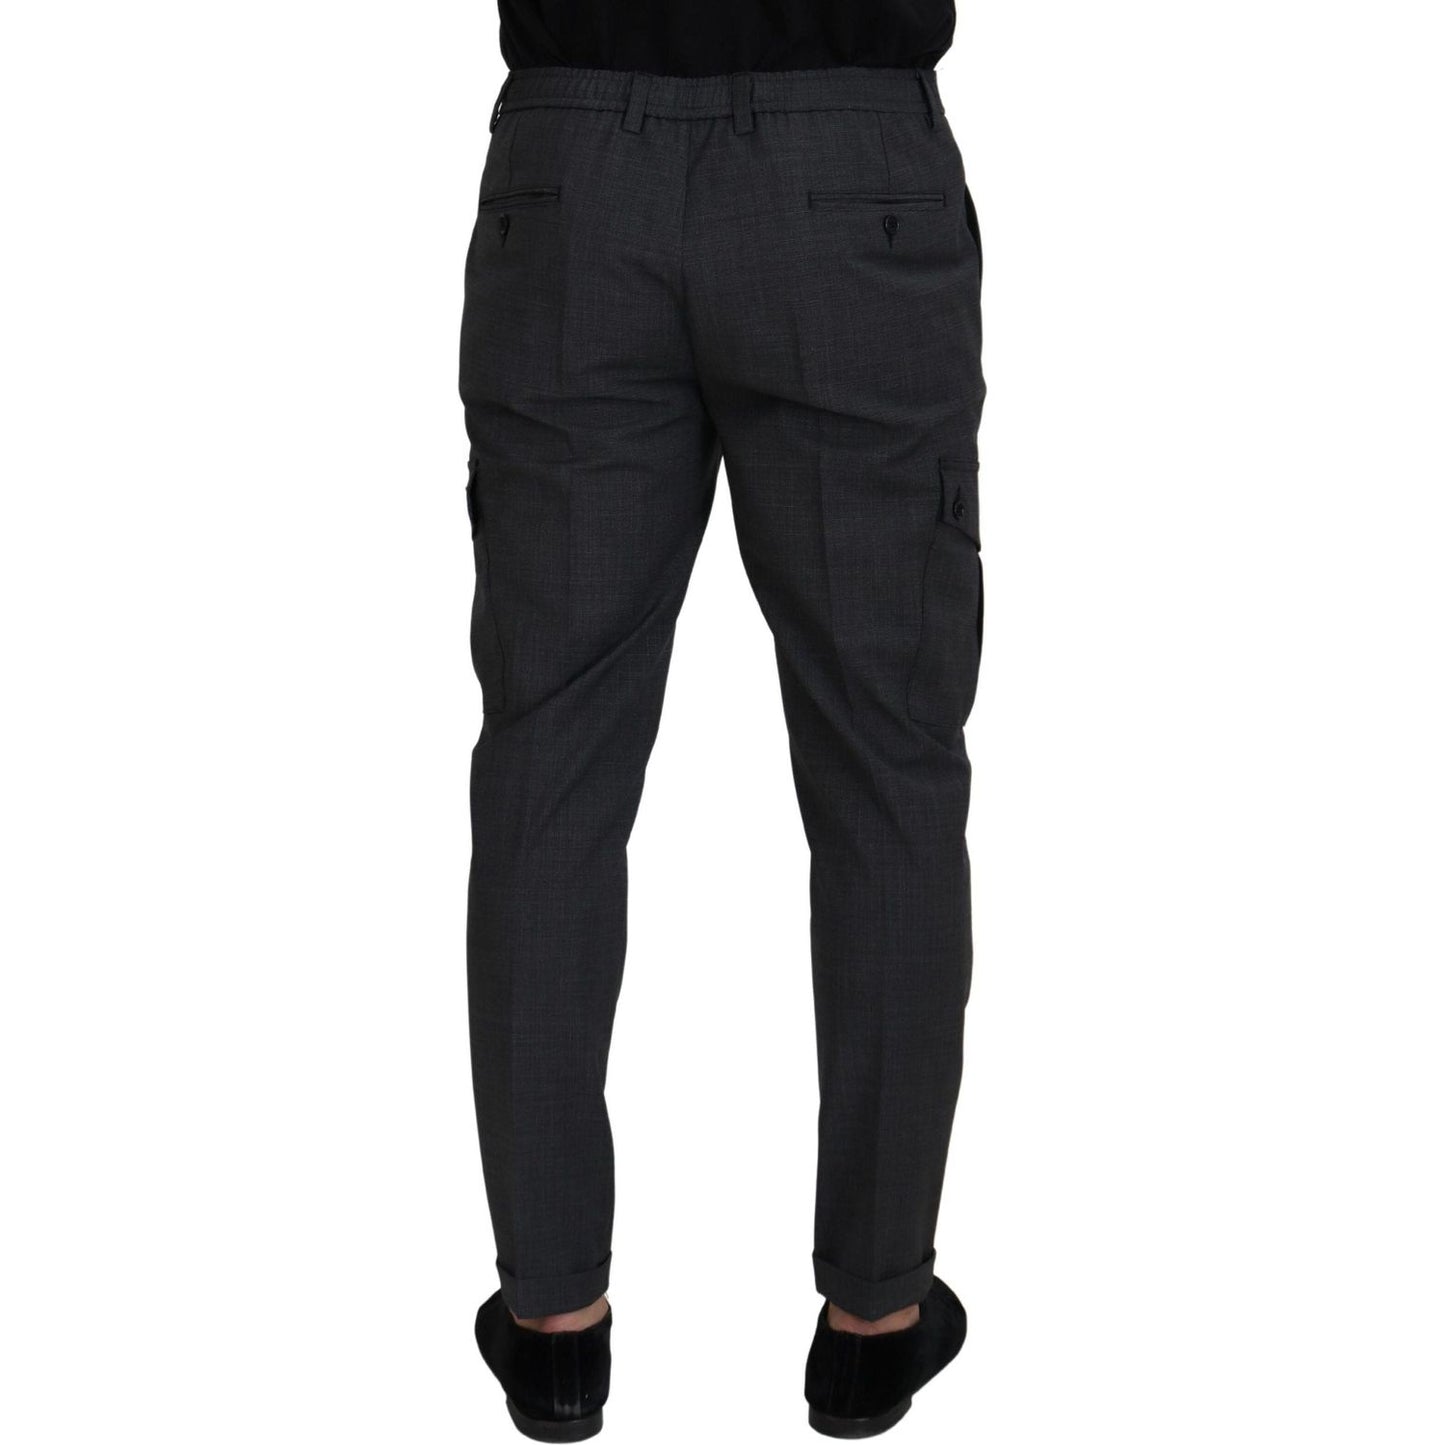 Dolce & Gabbana Elegant Checkered Slim Fit Cargo Pants gray-checked-cargo-trousers-stretch-pants